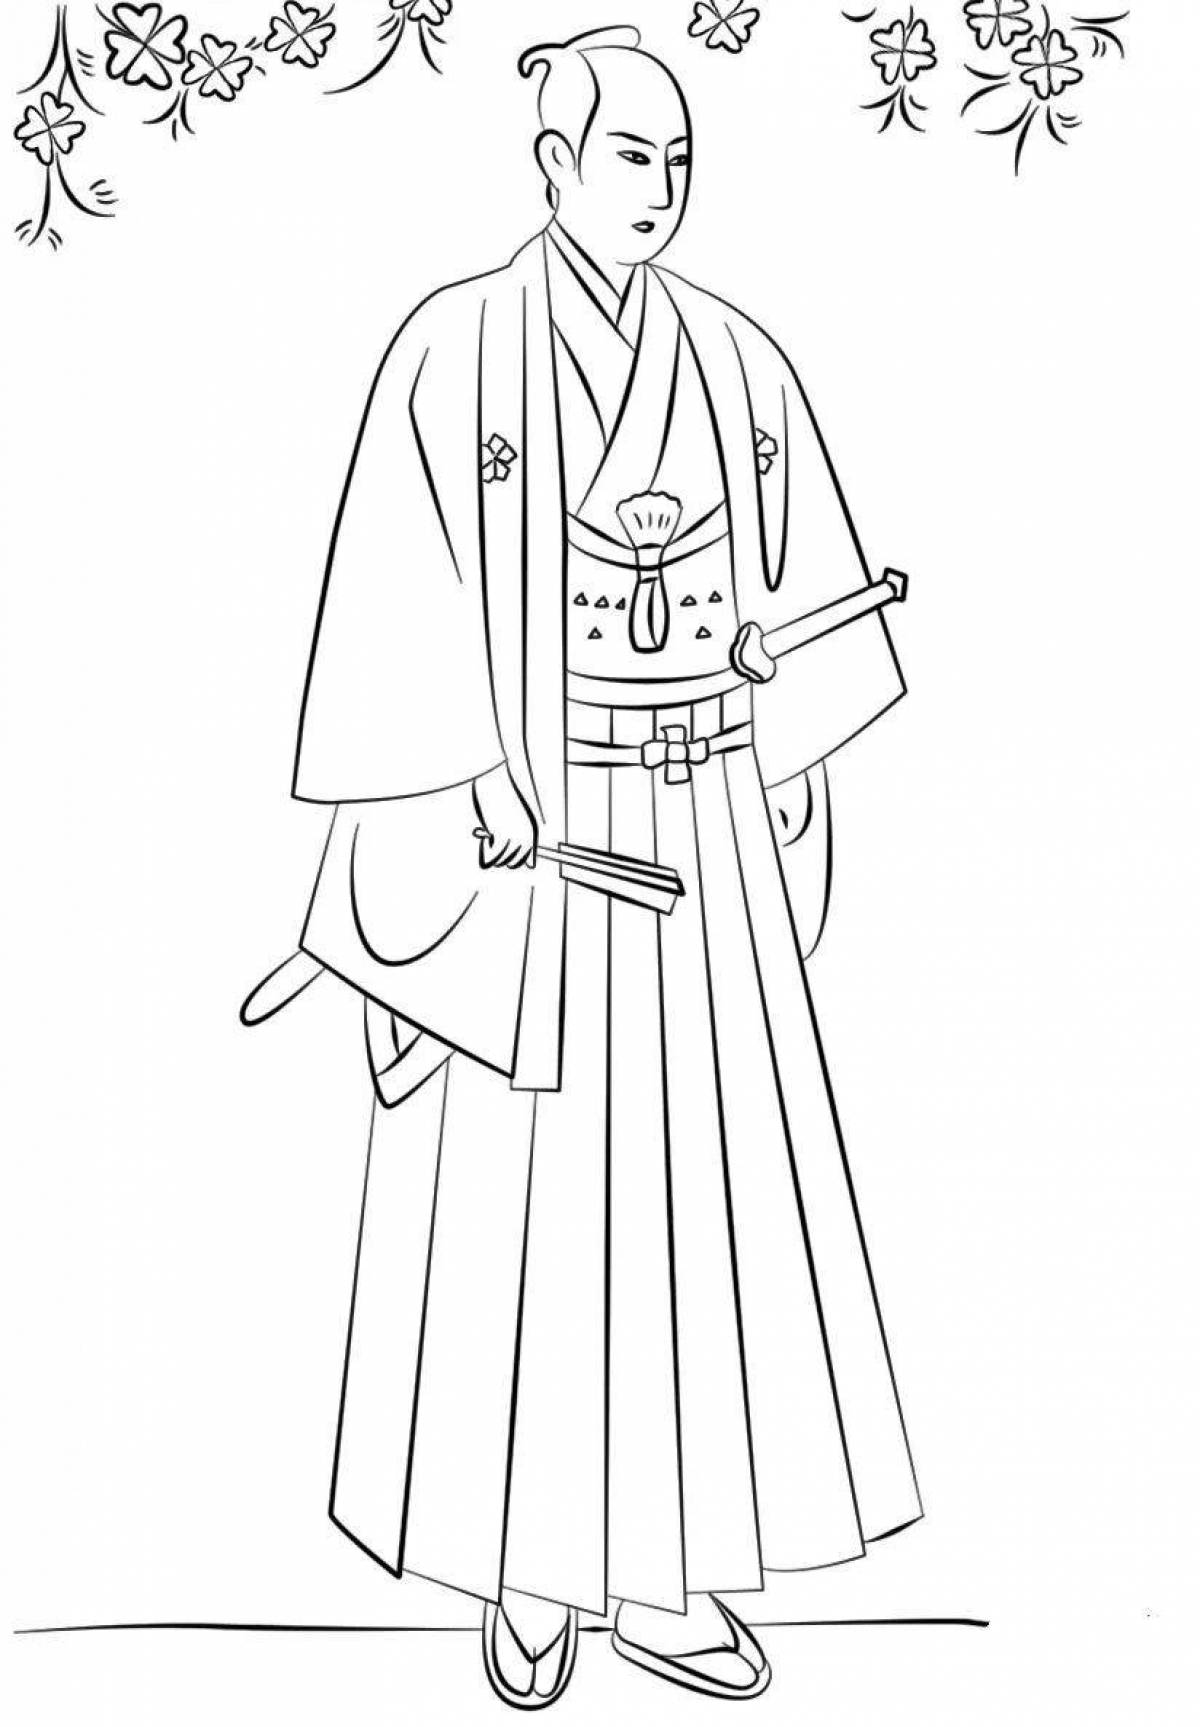 Coloring book exotic japanese clothes